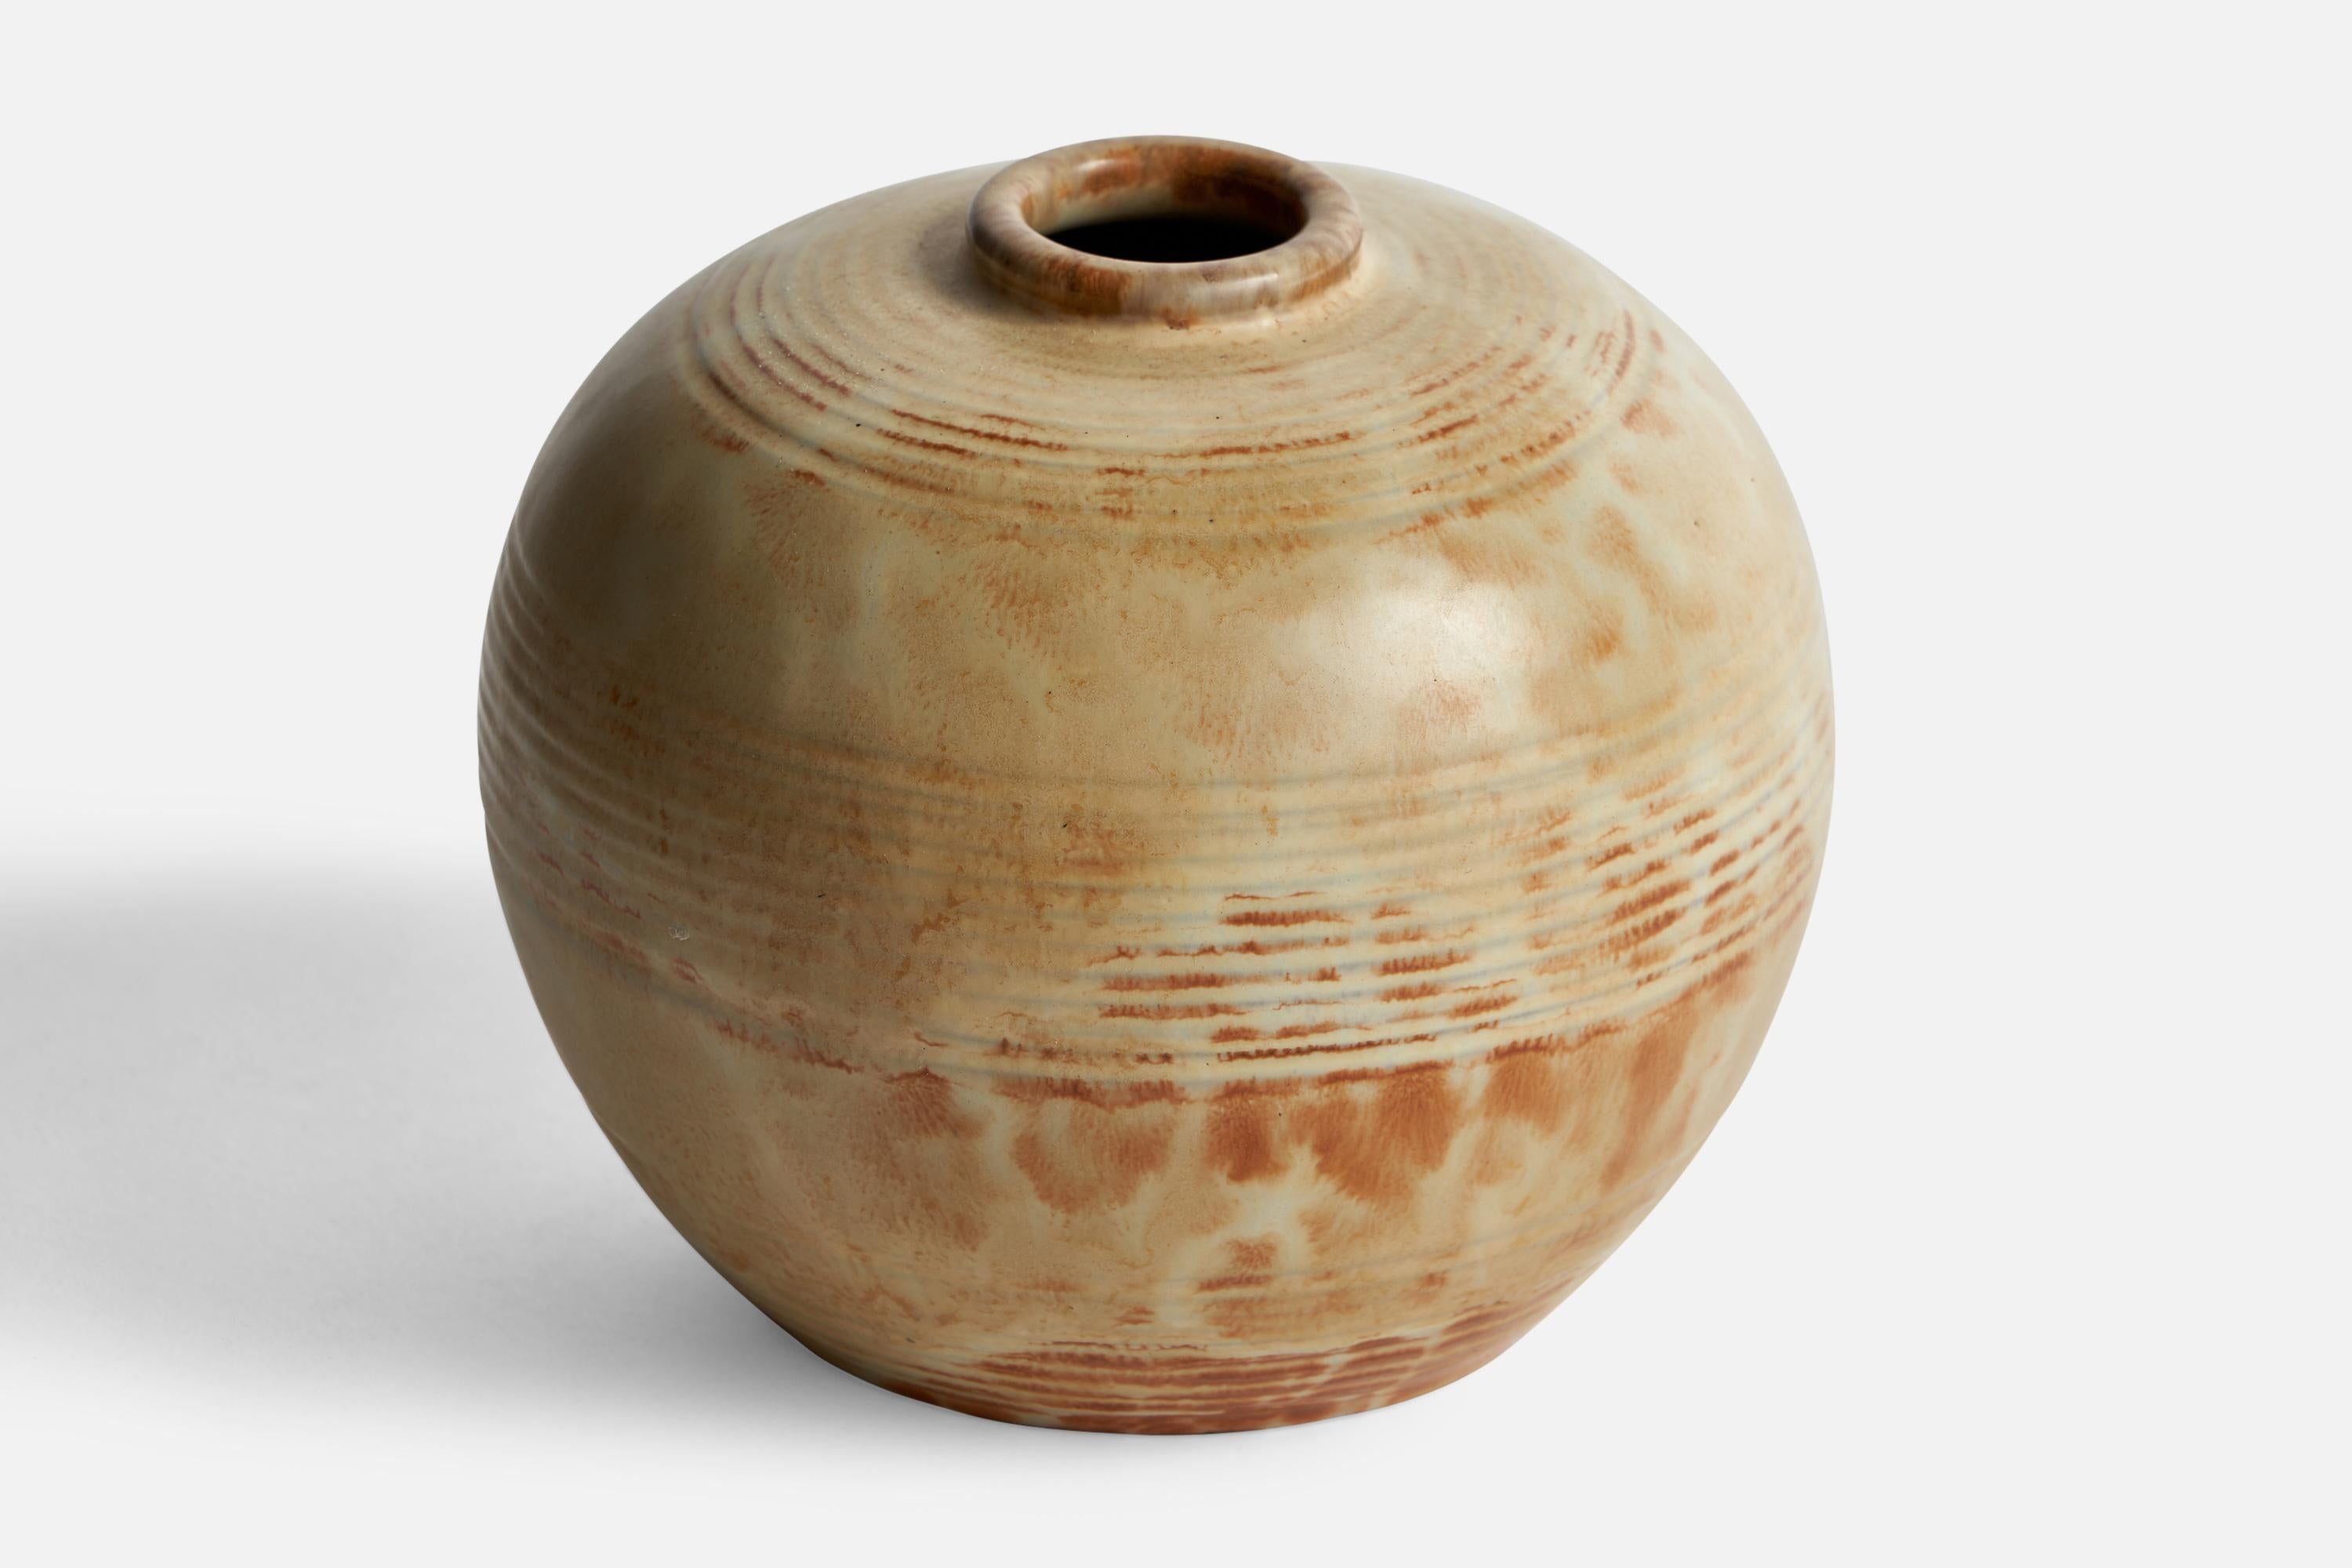 A beige and brown-glazed incised earthenware vase designed by Anna-Lisa Thomson and produced by Upsala Ekeby, Sweden, 1930s.